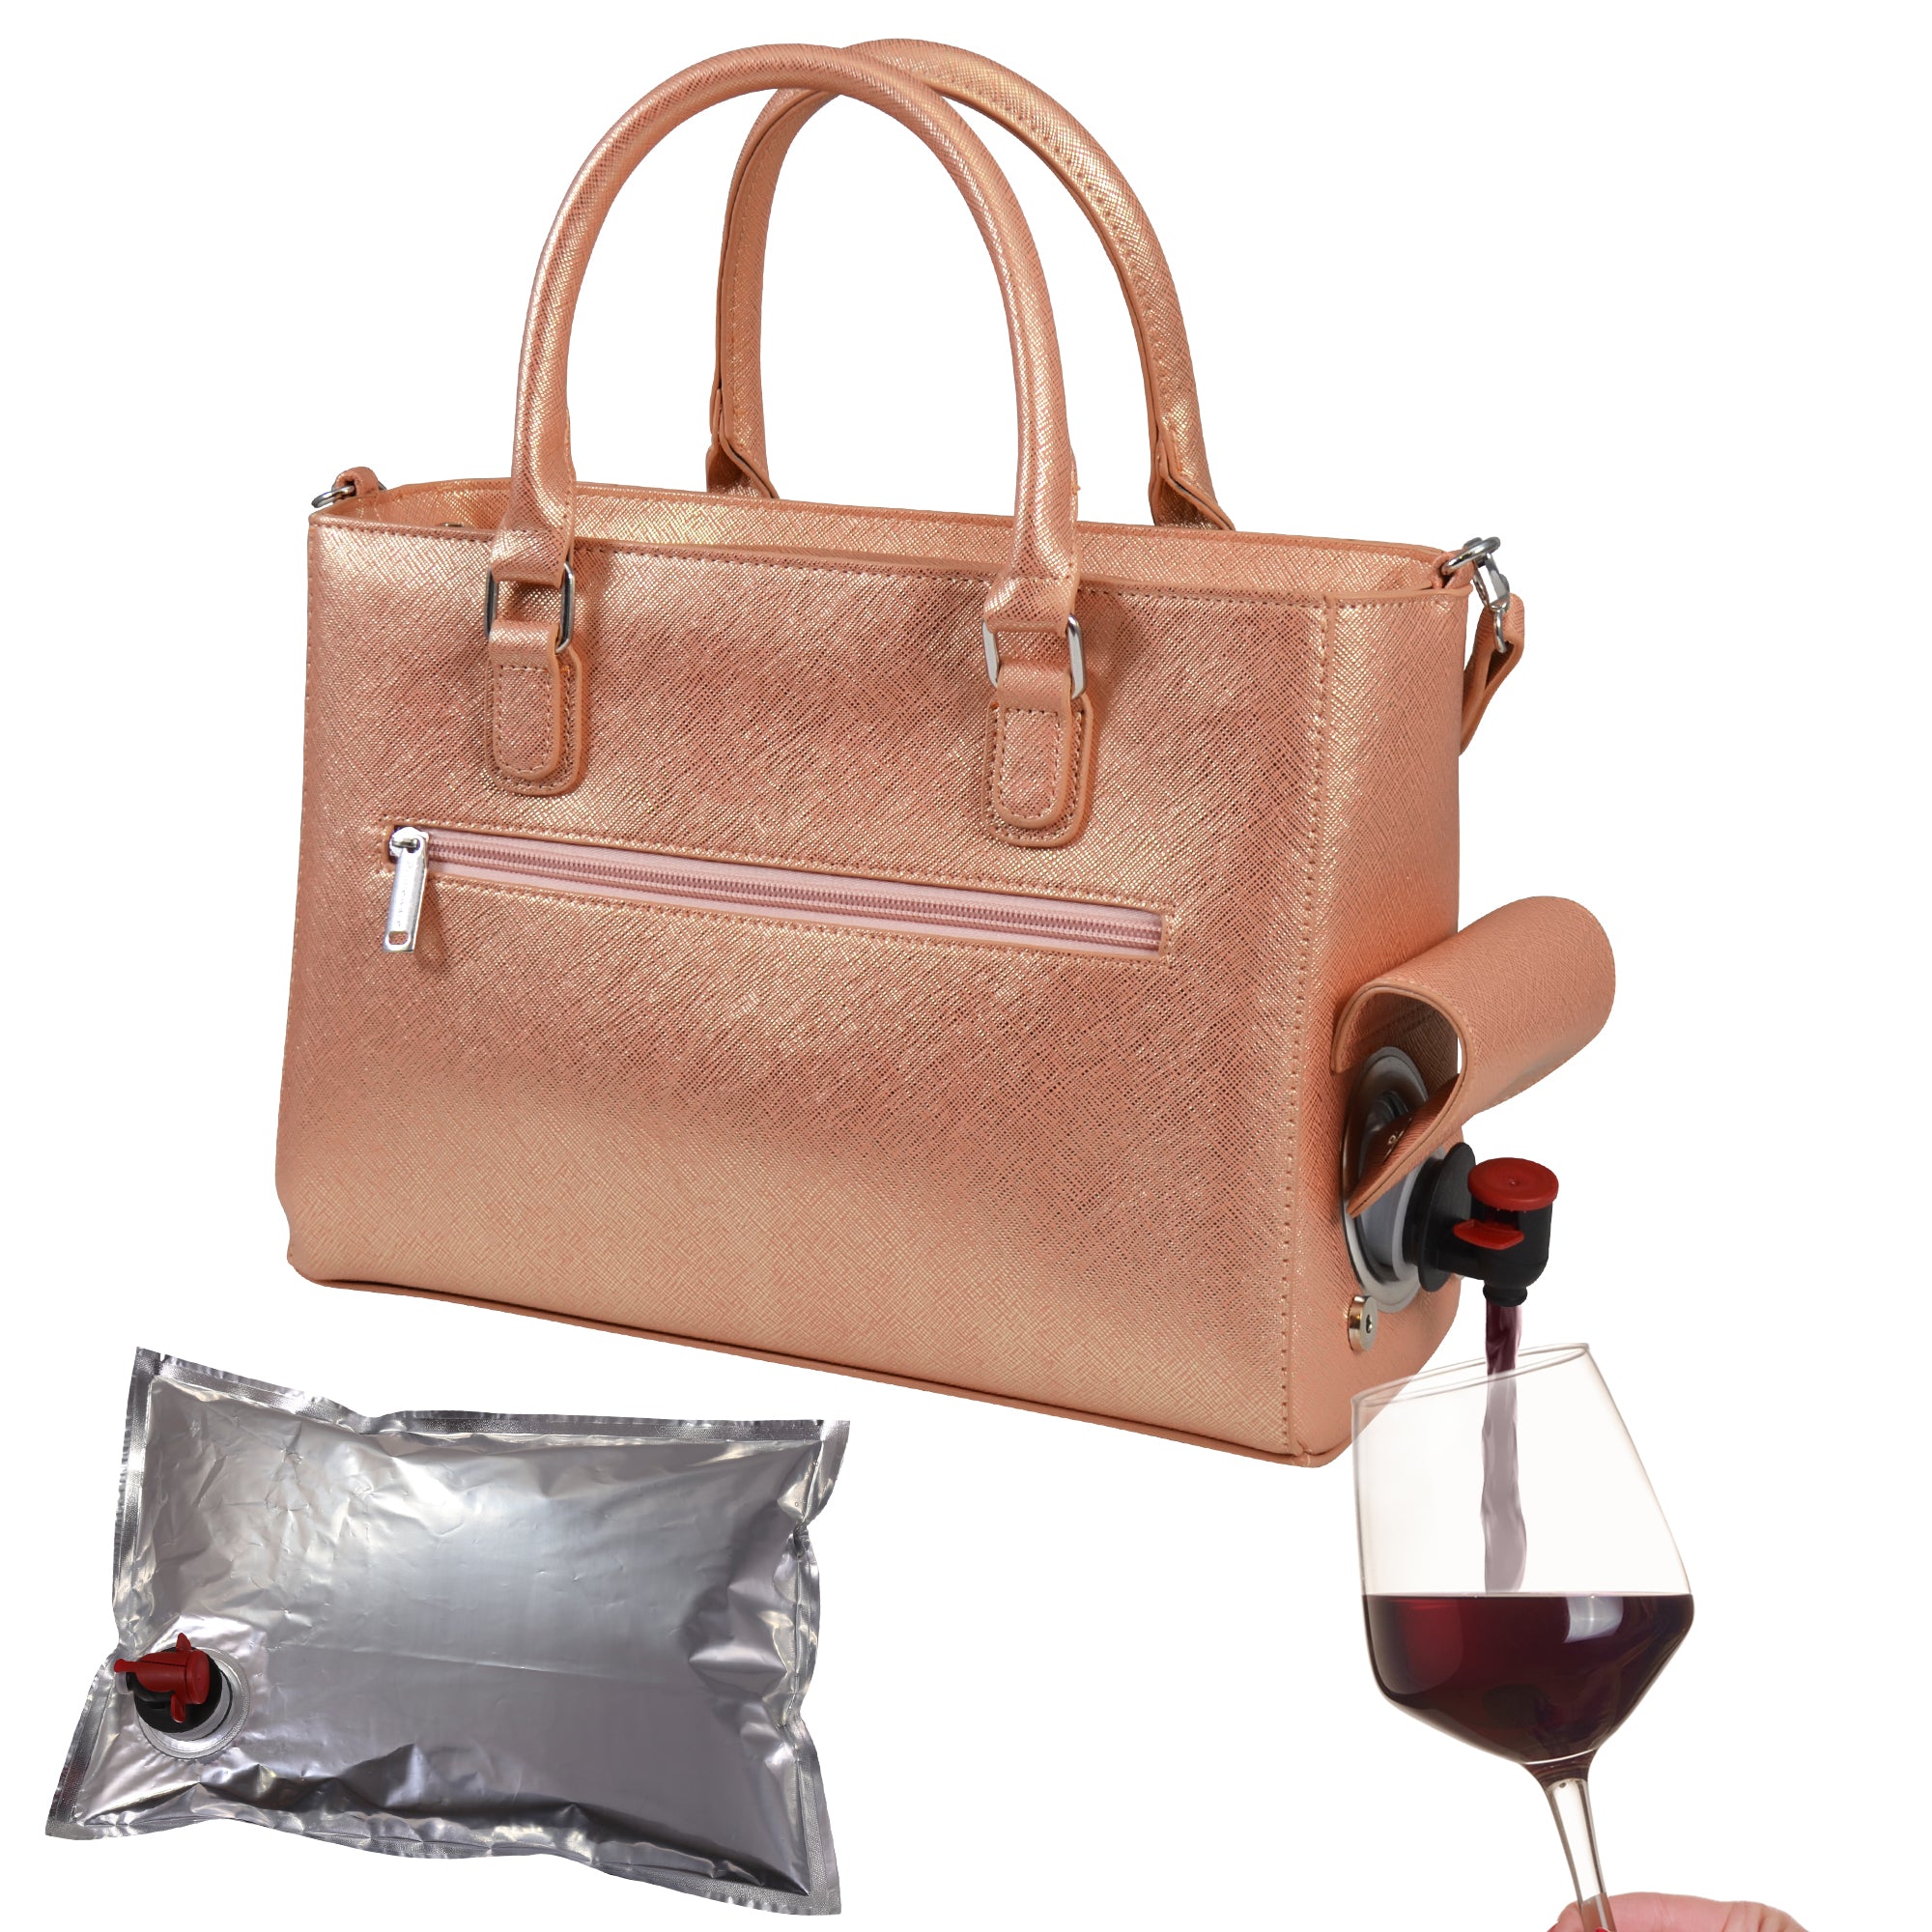 PortoVino City Tote Bag - Canvas Wine Purse with Hidden Insulated  Compartment and Dispenser Flask that Holds and Pours 2 bottles of Wine!  Traveling, Concerts, Bachelorette Party and Christmas Gift! : Amazon.co.uk: